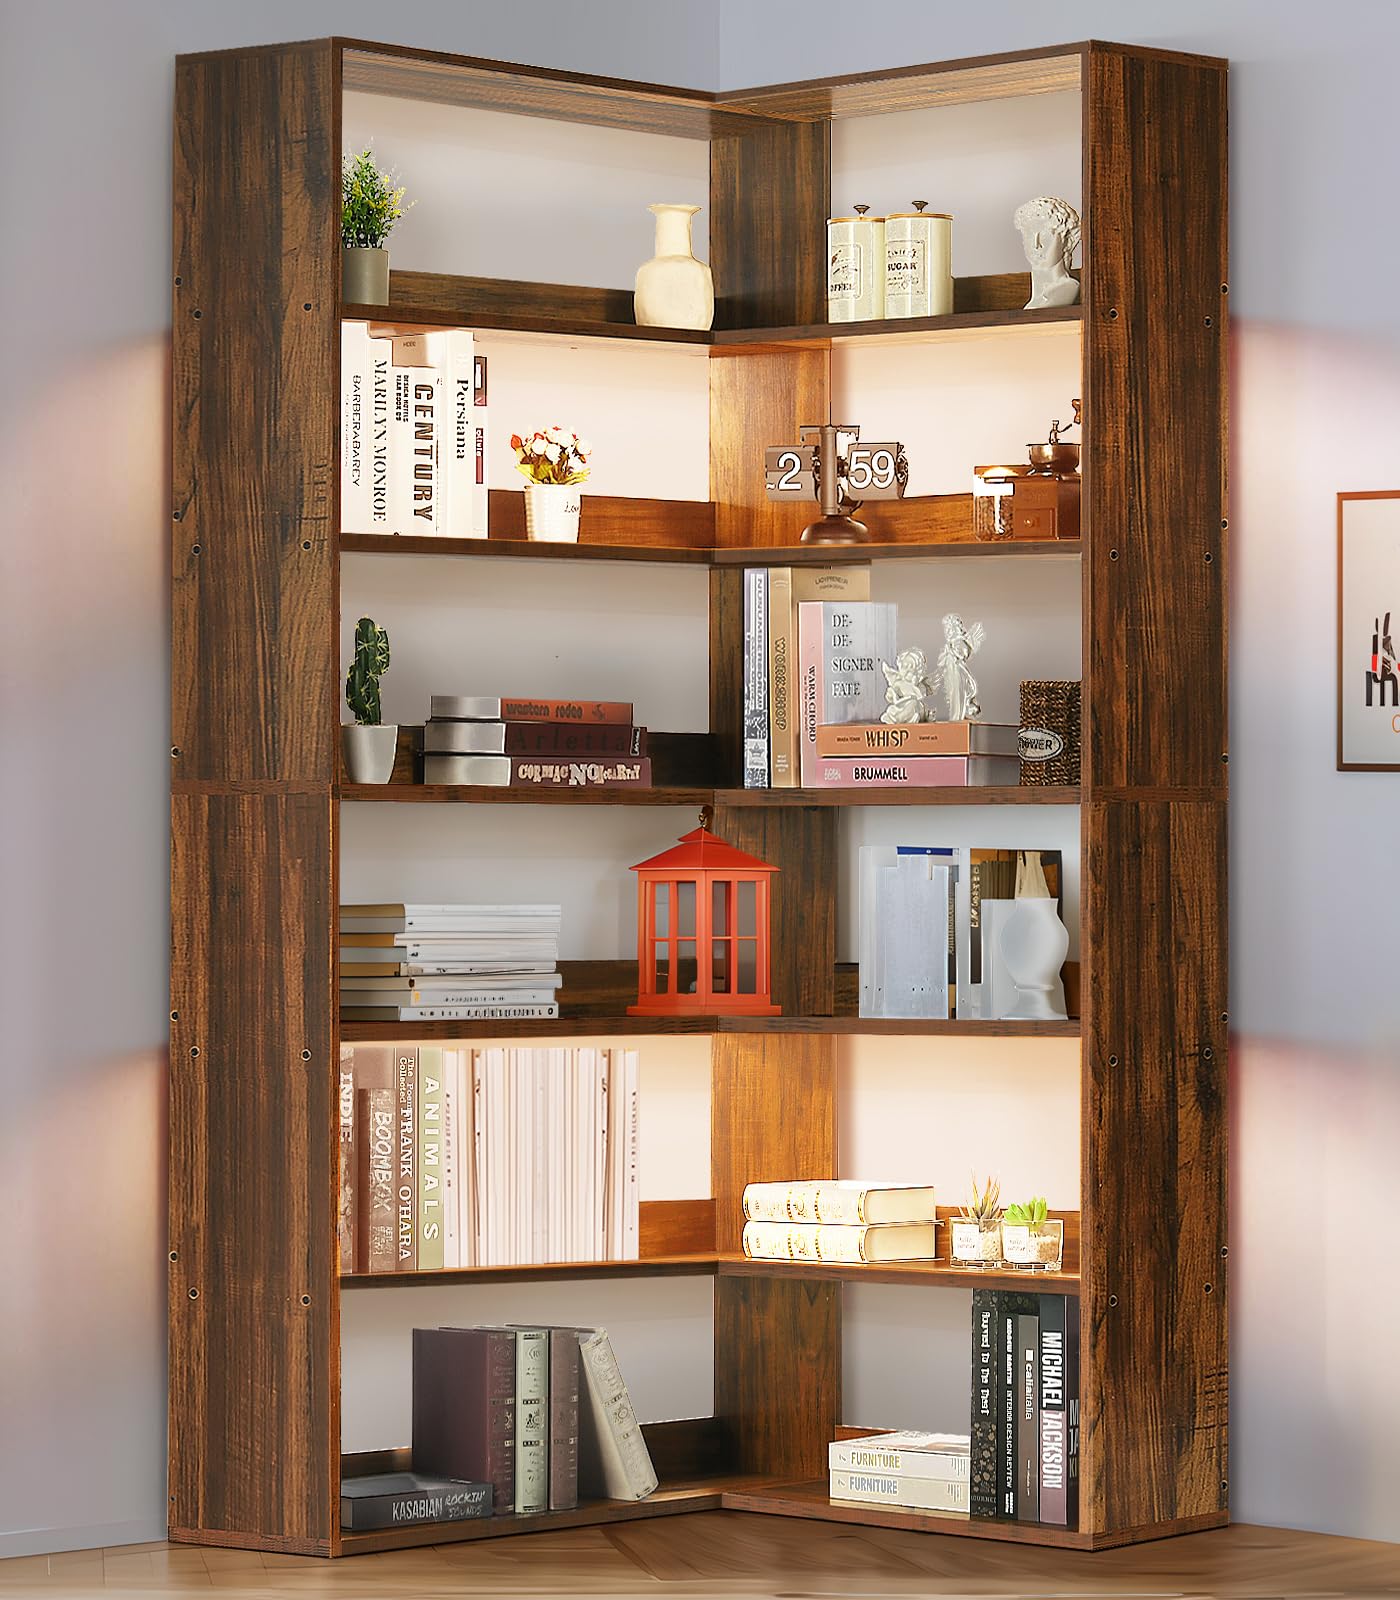 4 EVER WINNER 6 Tier Corner Bookshelf with LED, 71” Tall Industrial Etagere Bookcase with Display Shelves for Home Office, L Shaped Bookshelf with Storage Corner Shelf for Living Room, Rustic Brown